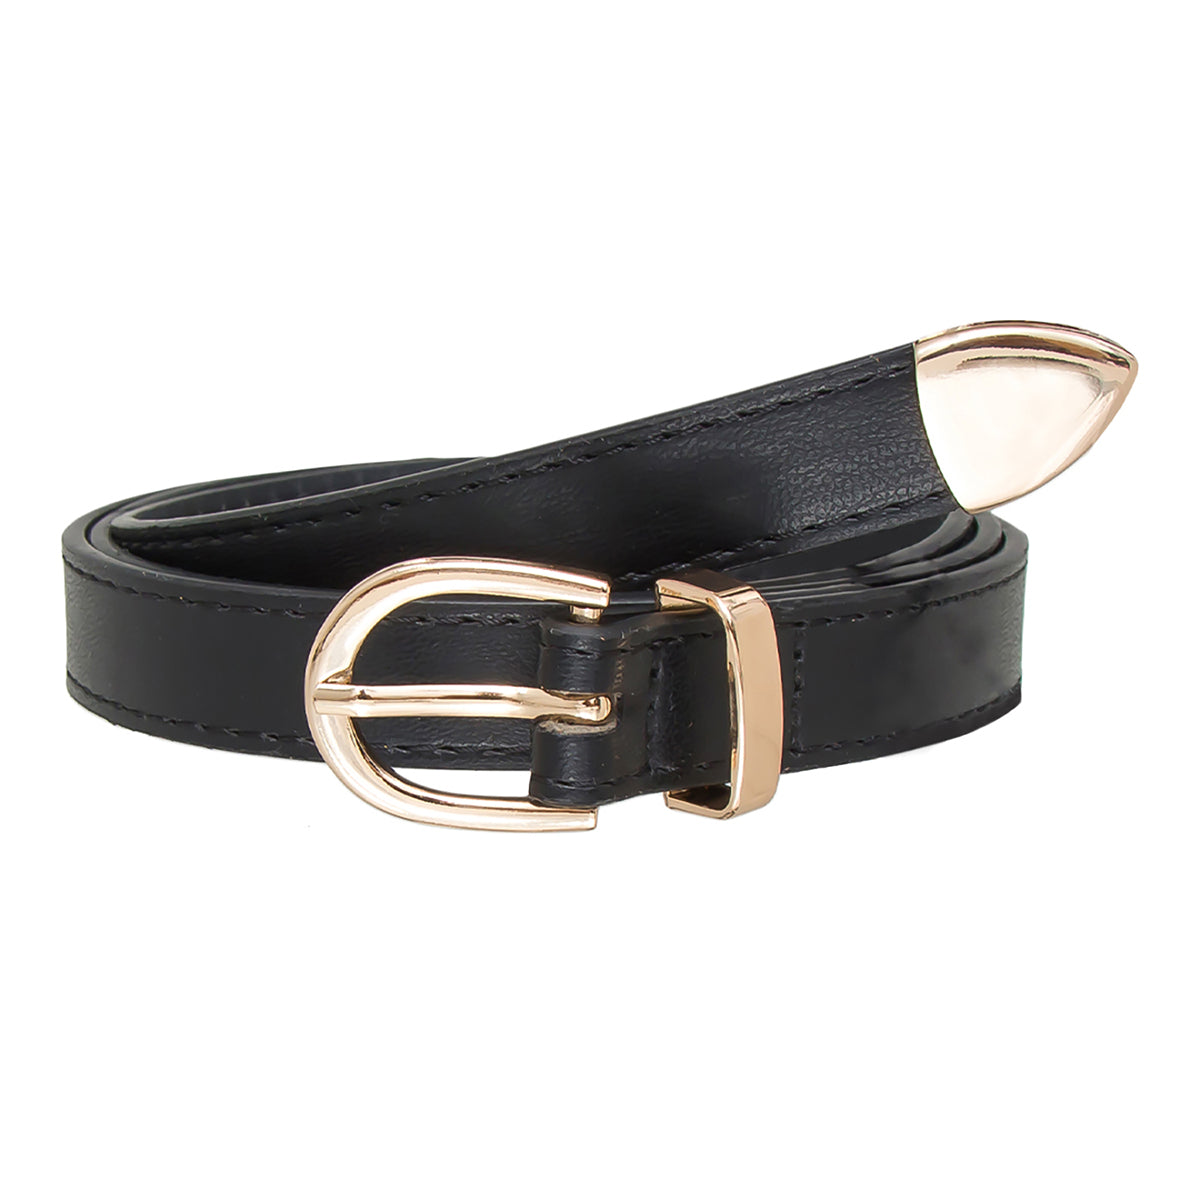 Black With Gold Tone Thin Belt